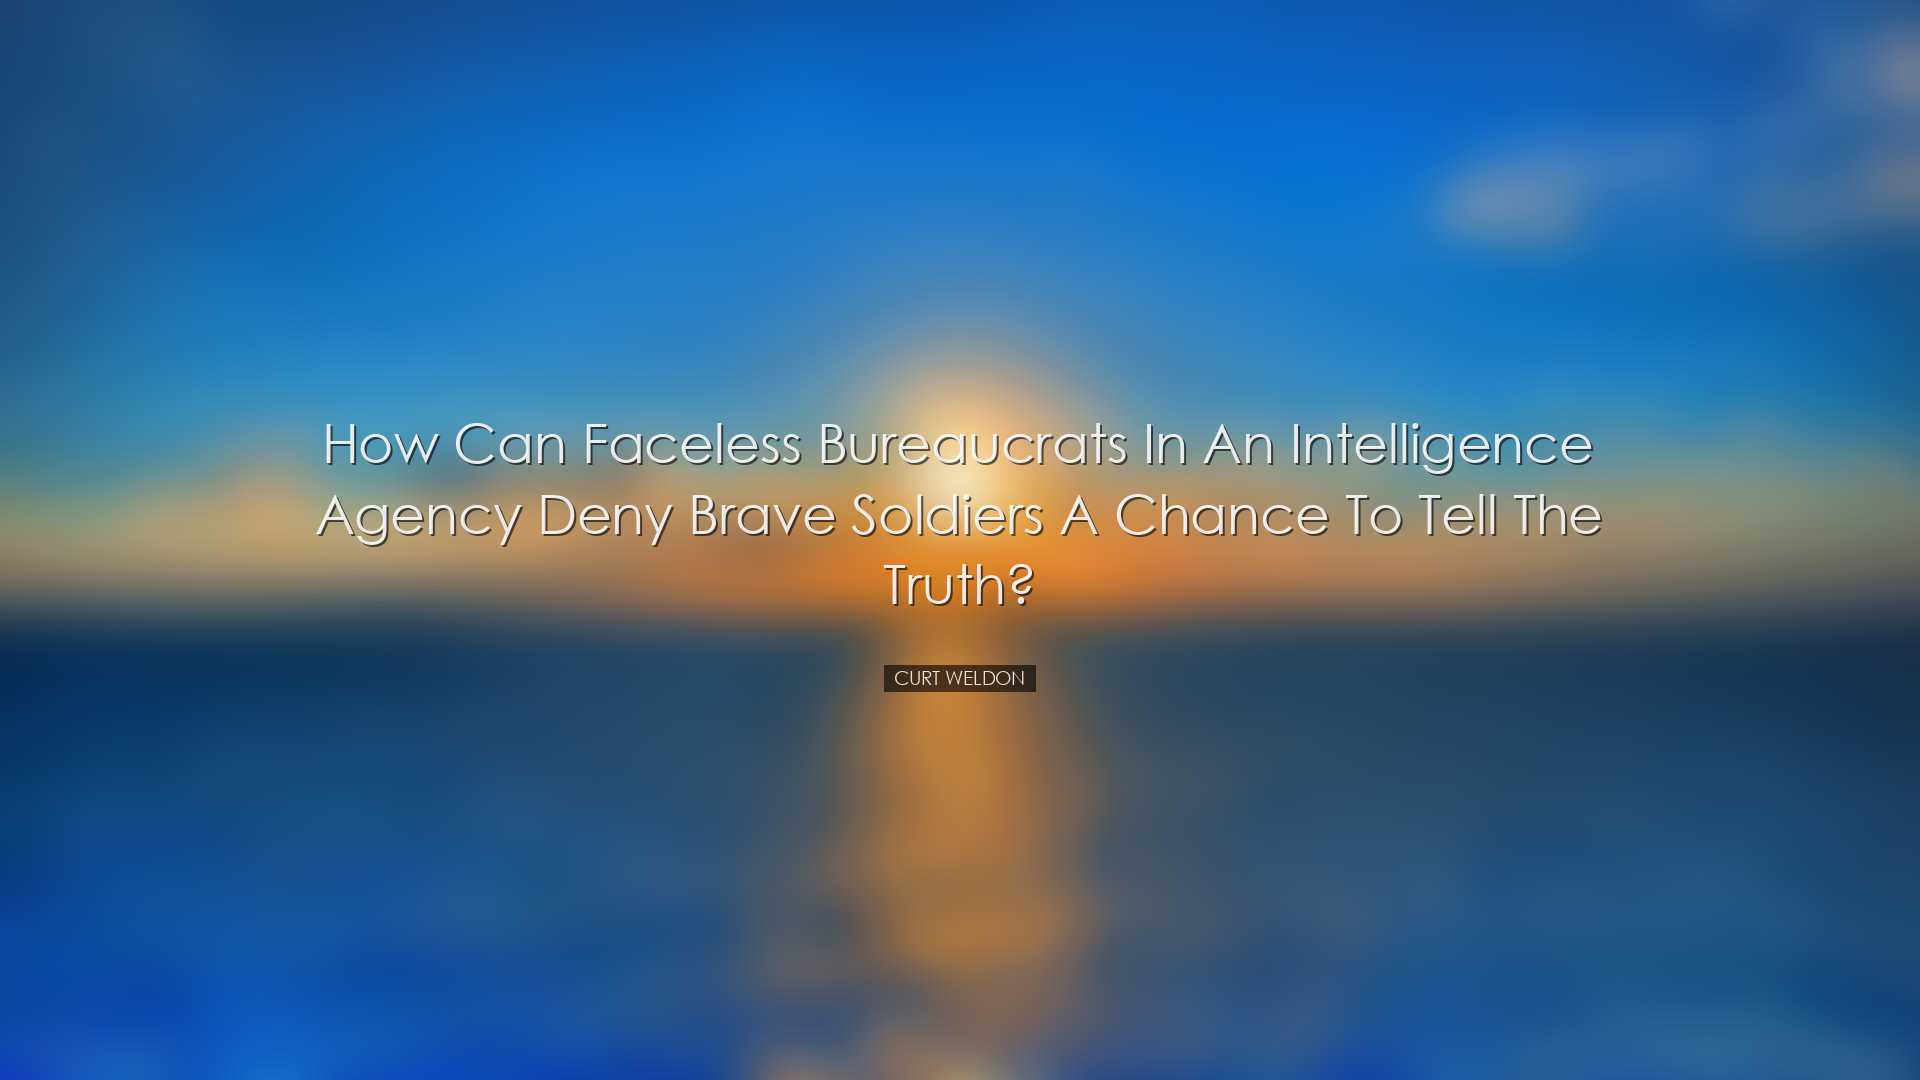 How can faceless bureaucrats in an intelligence agency deny brave